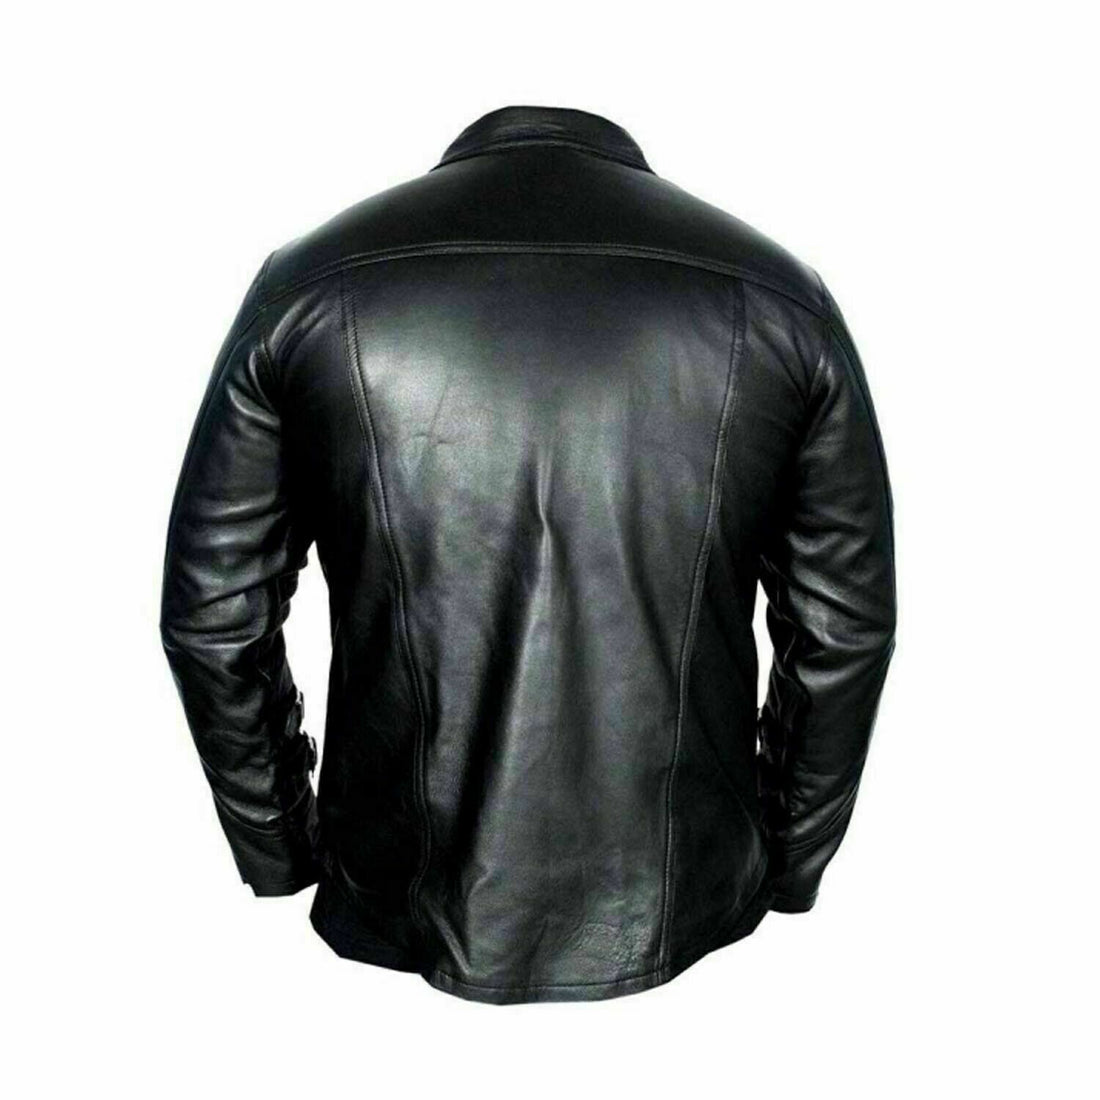 REAL LEATHER Mens Black PUNK / ROCK / GOTH Shirt BLUF - Luxurena Leather